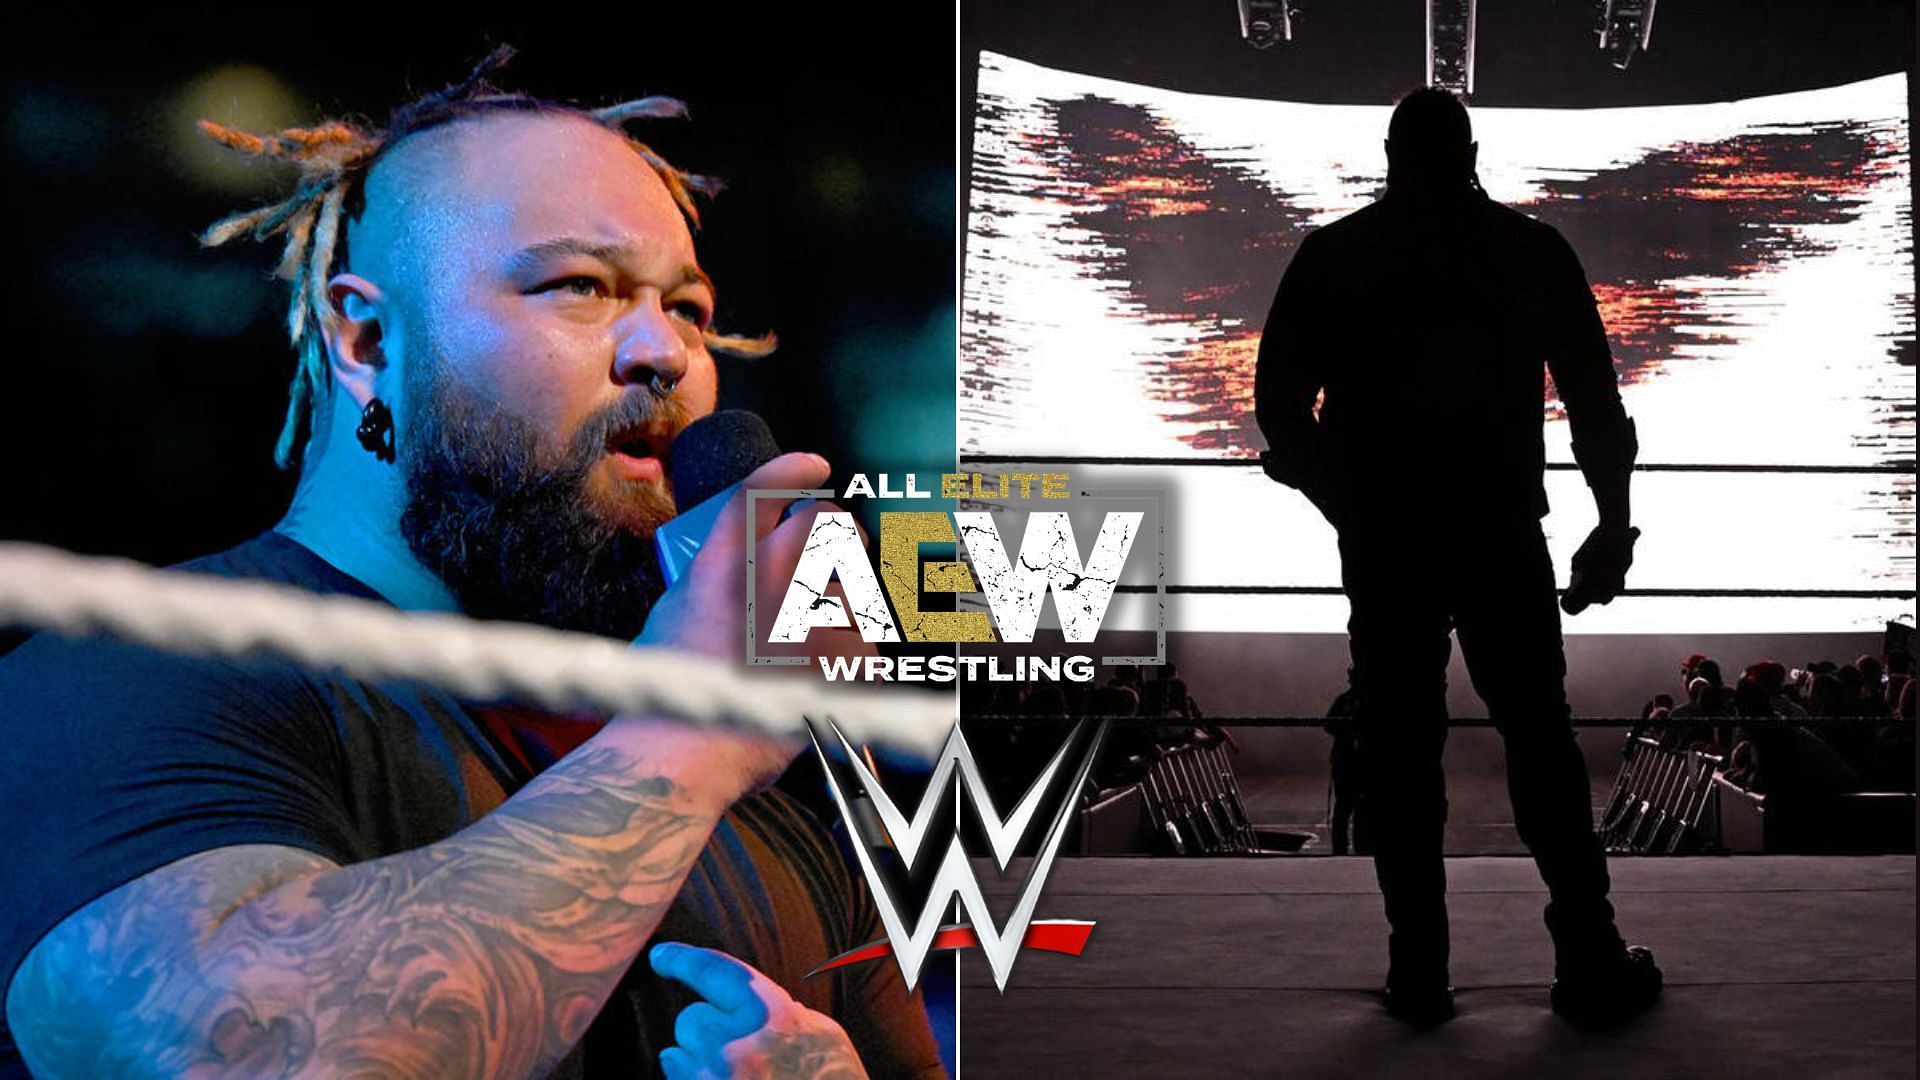 Bray Wyatt has been a hot topic in the pro-wrestling world lately